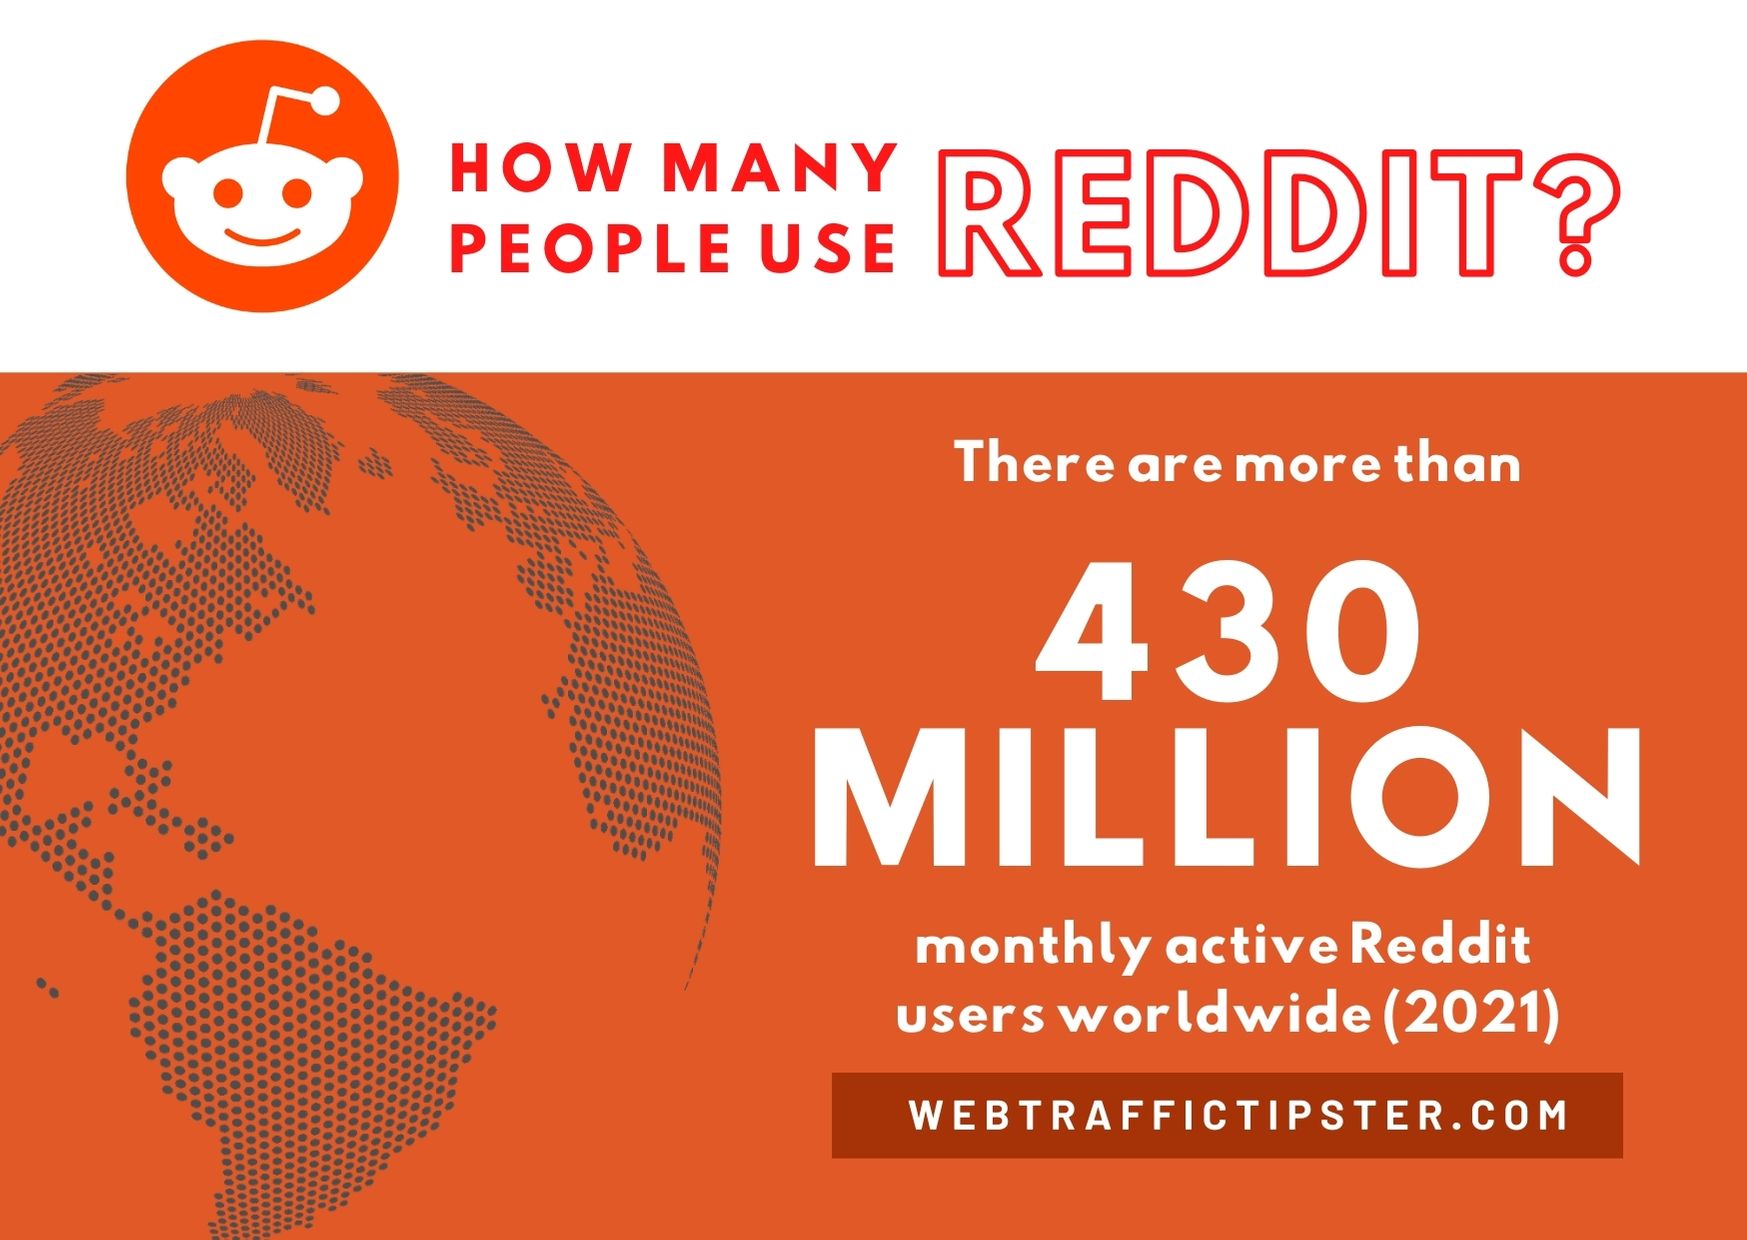 How many people use reddit?